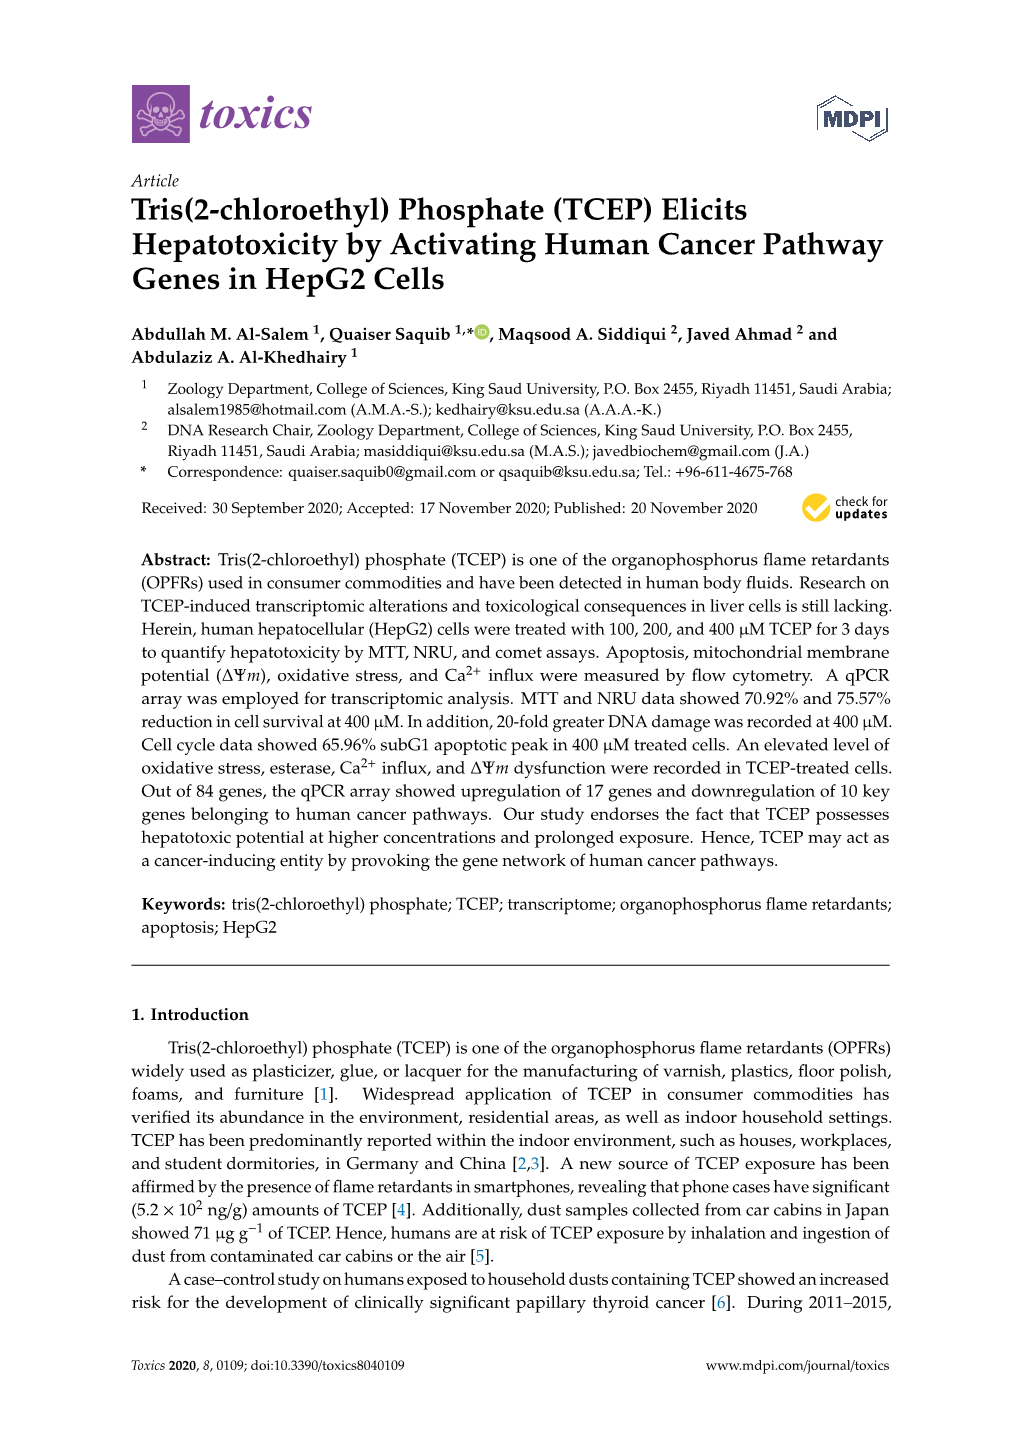 Tris(2-Chloroethyl) Phosphate (TCEP) Elicits Hepatotoxicity by Activating Human Cancer Pathway Genes in Hepg2 Cells